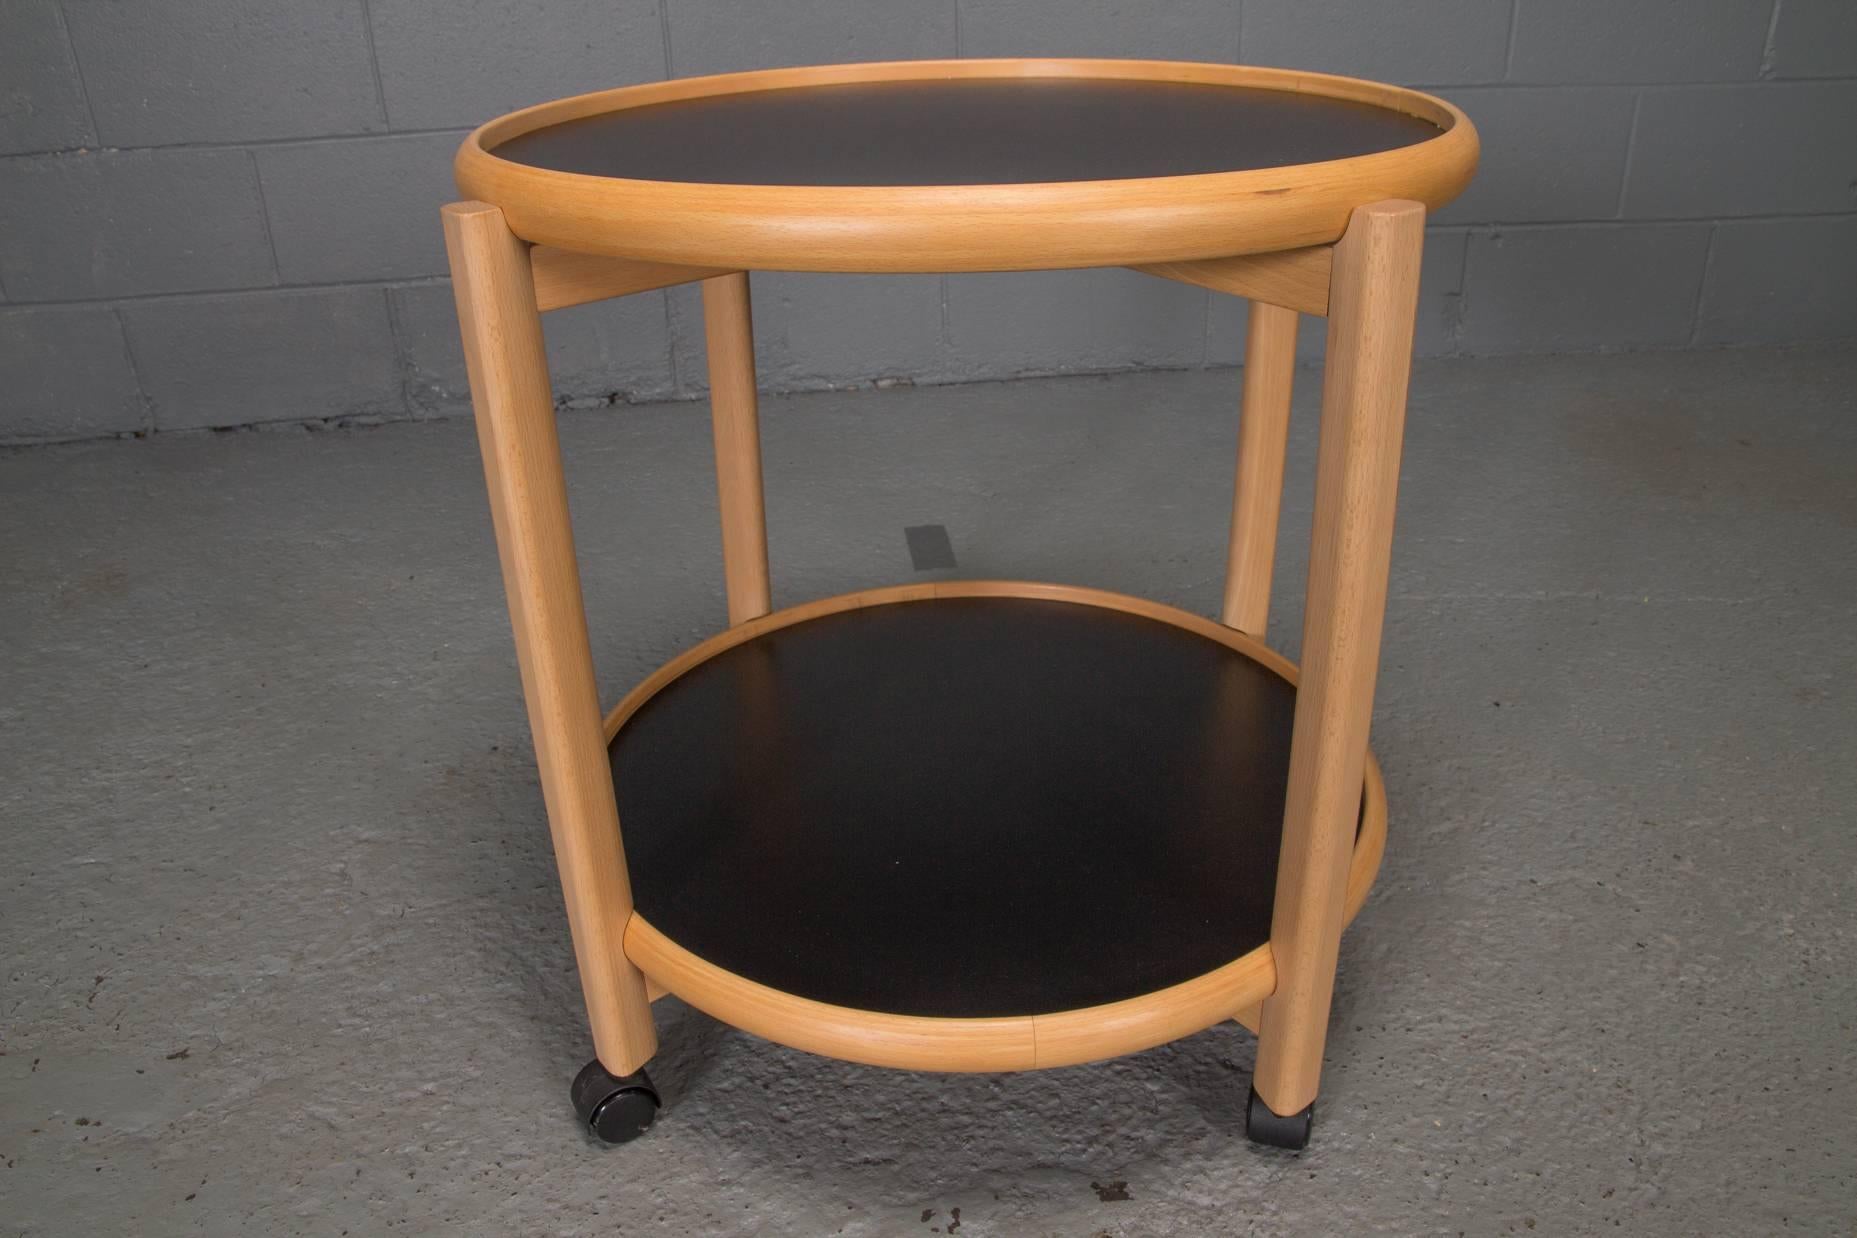 20th Century Two-Tier Reversible Top Beech and Laminate Side Table on Casters